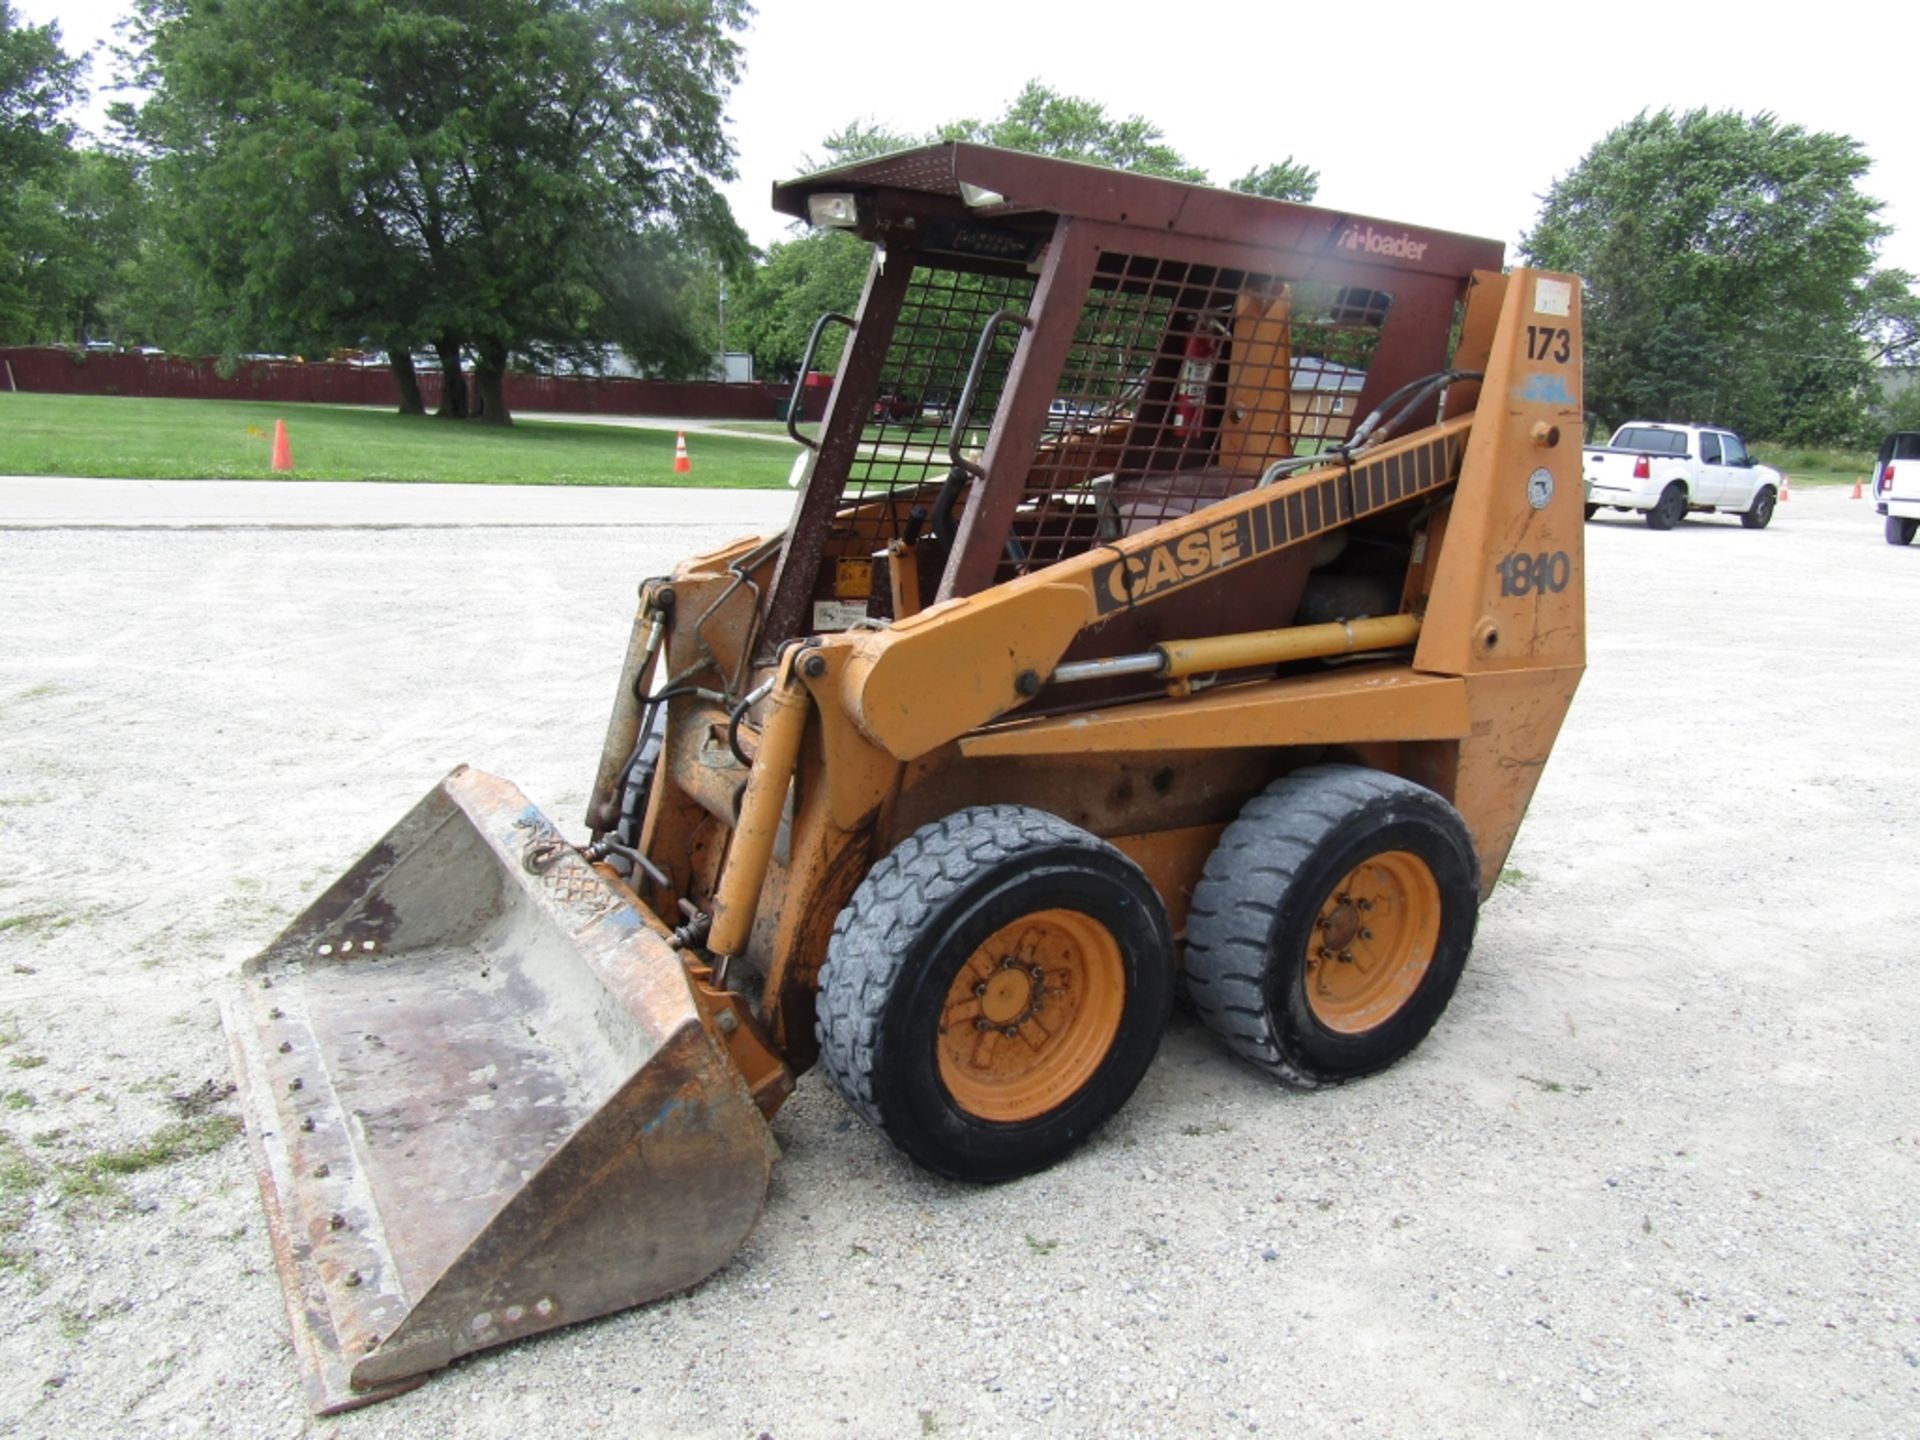 1991 Case 1840 Uni-loader with Bucket, 3291 Hours, ID #JAF0046173 - Image 3 of 12